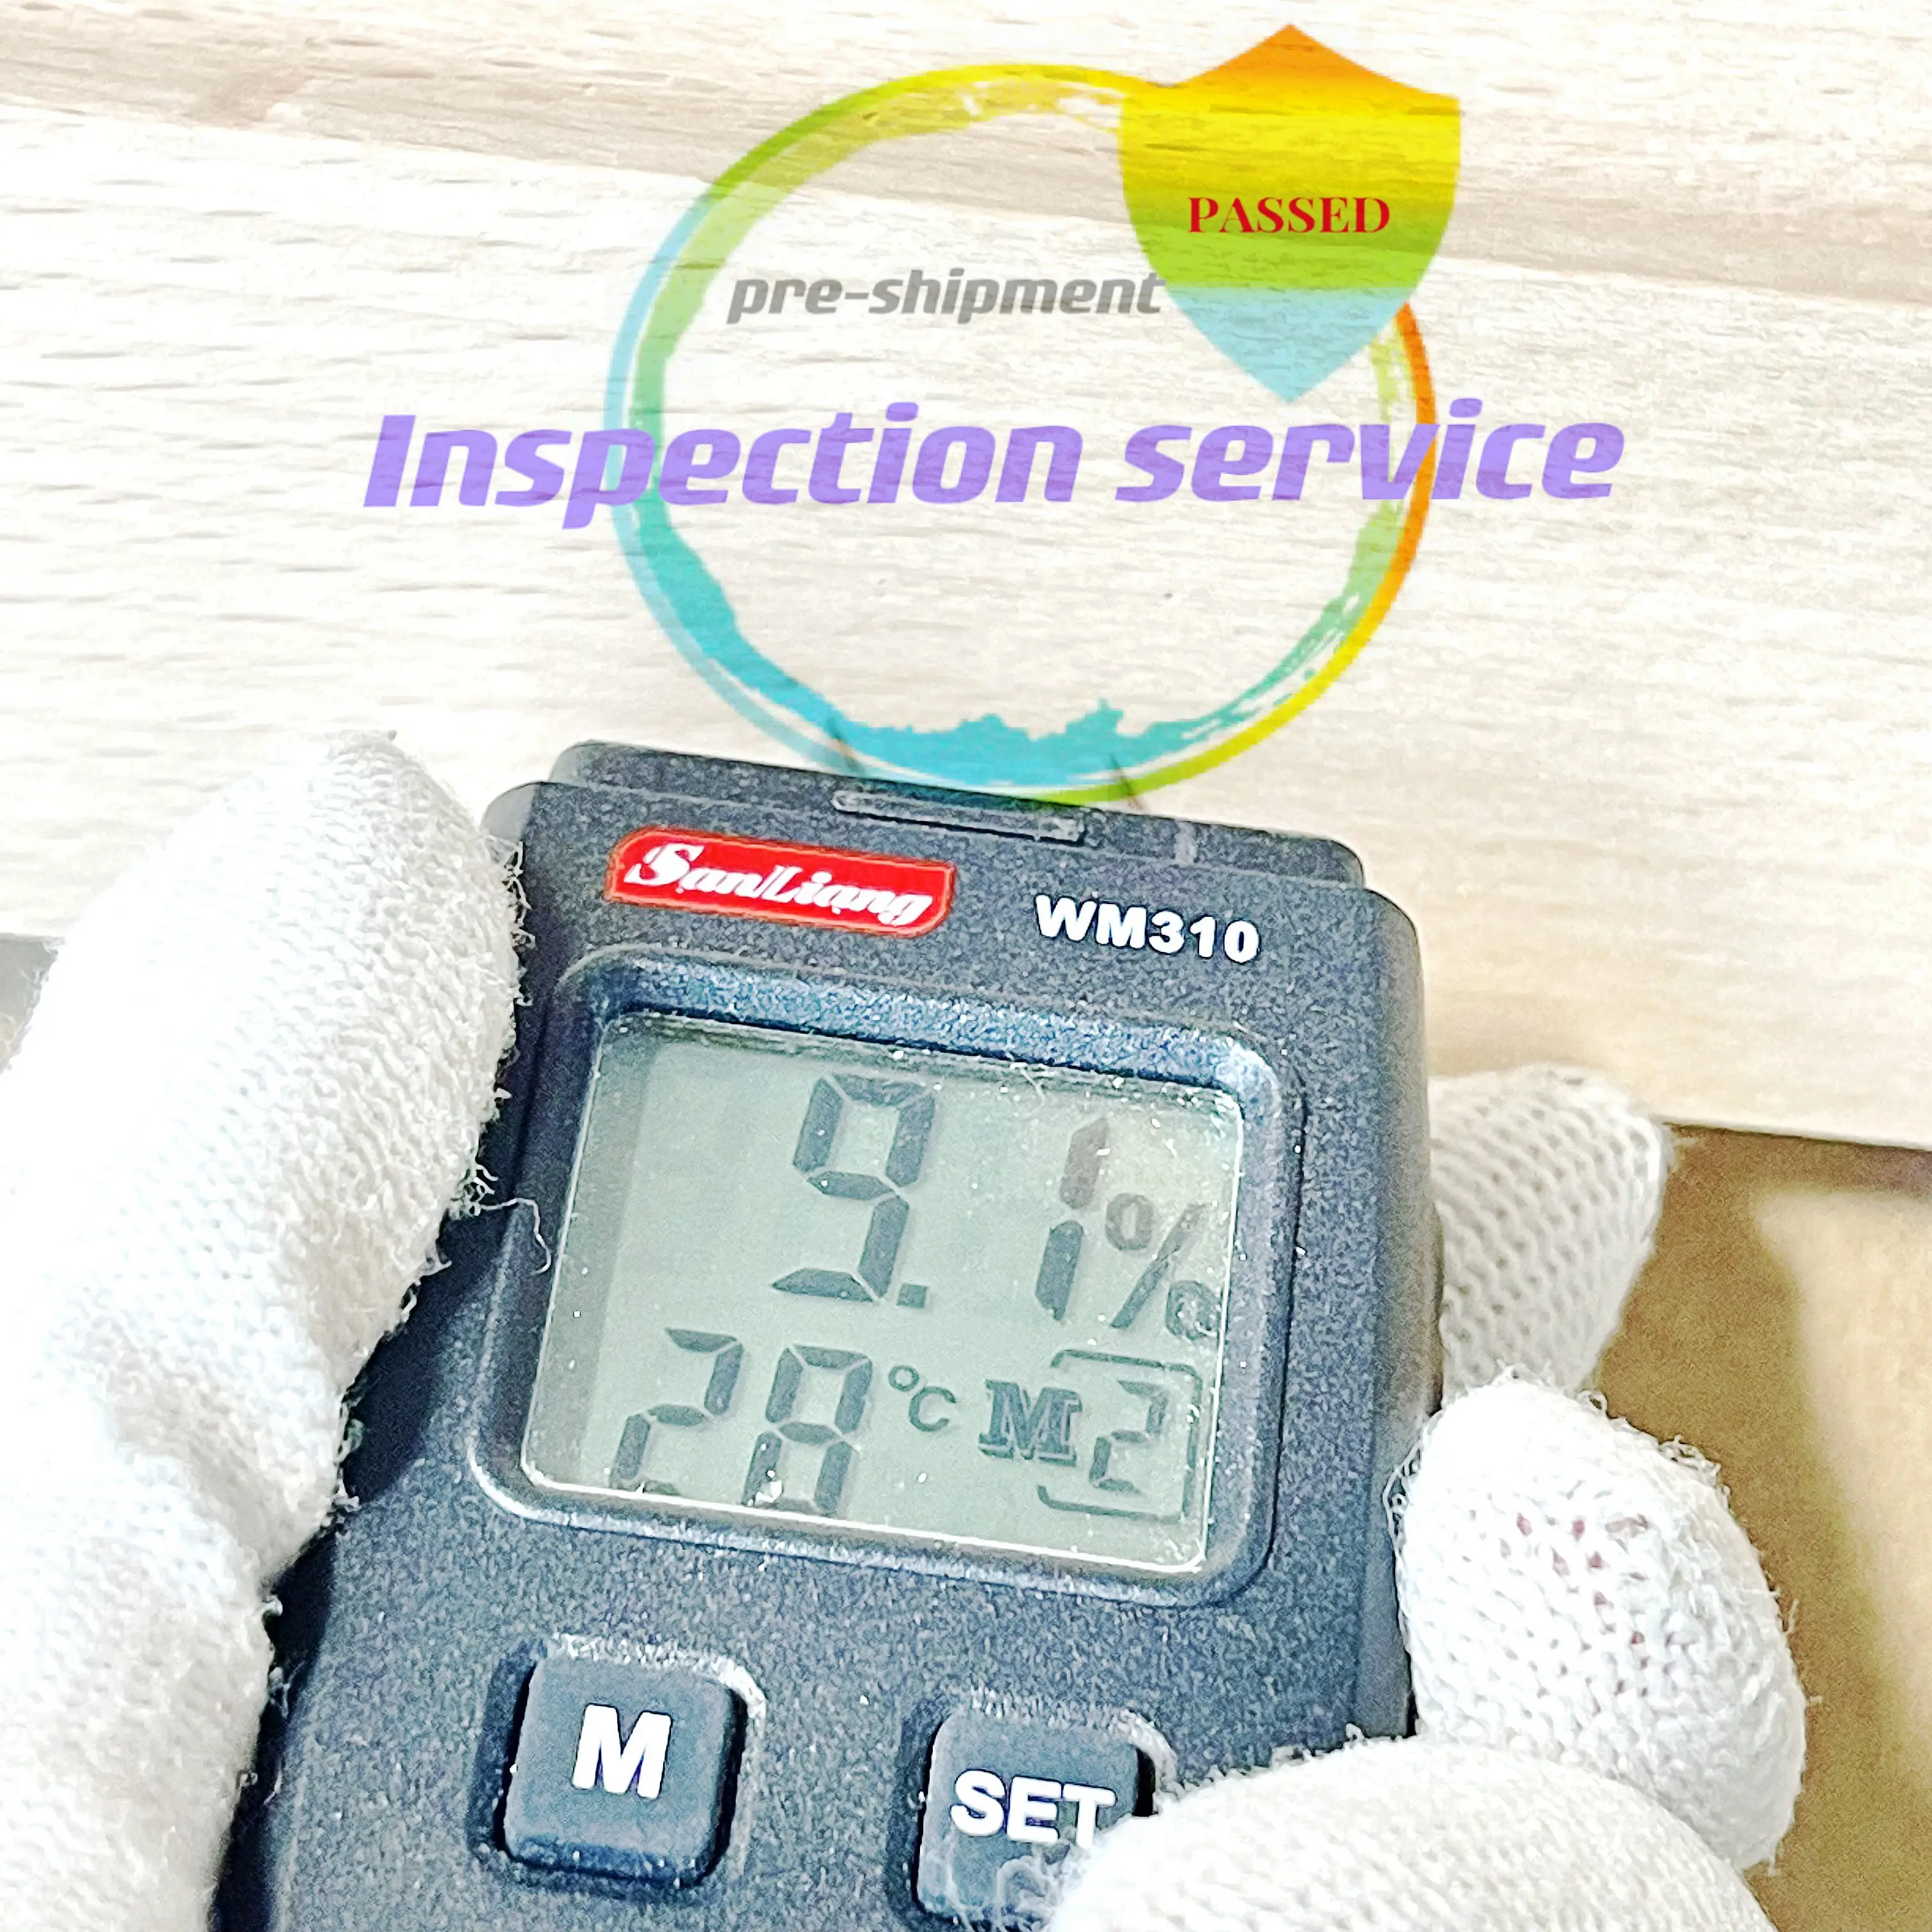 Pre-Shipment Inspection Services Third Party Inspection company product quality inspection service quality control service